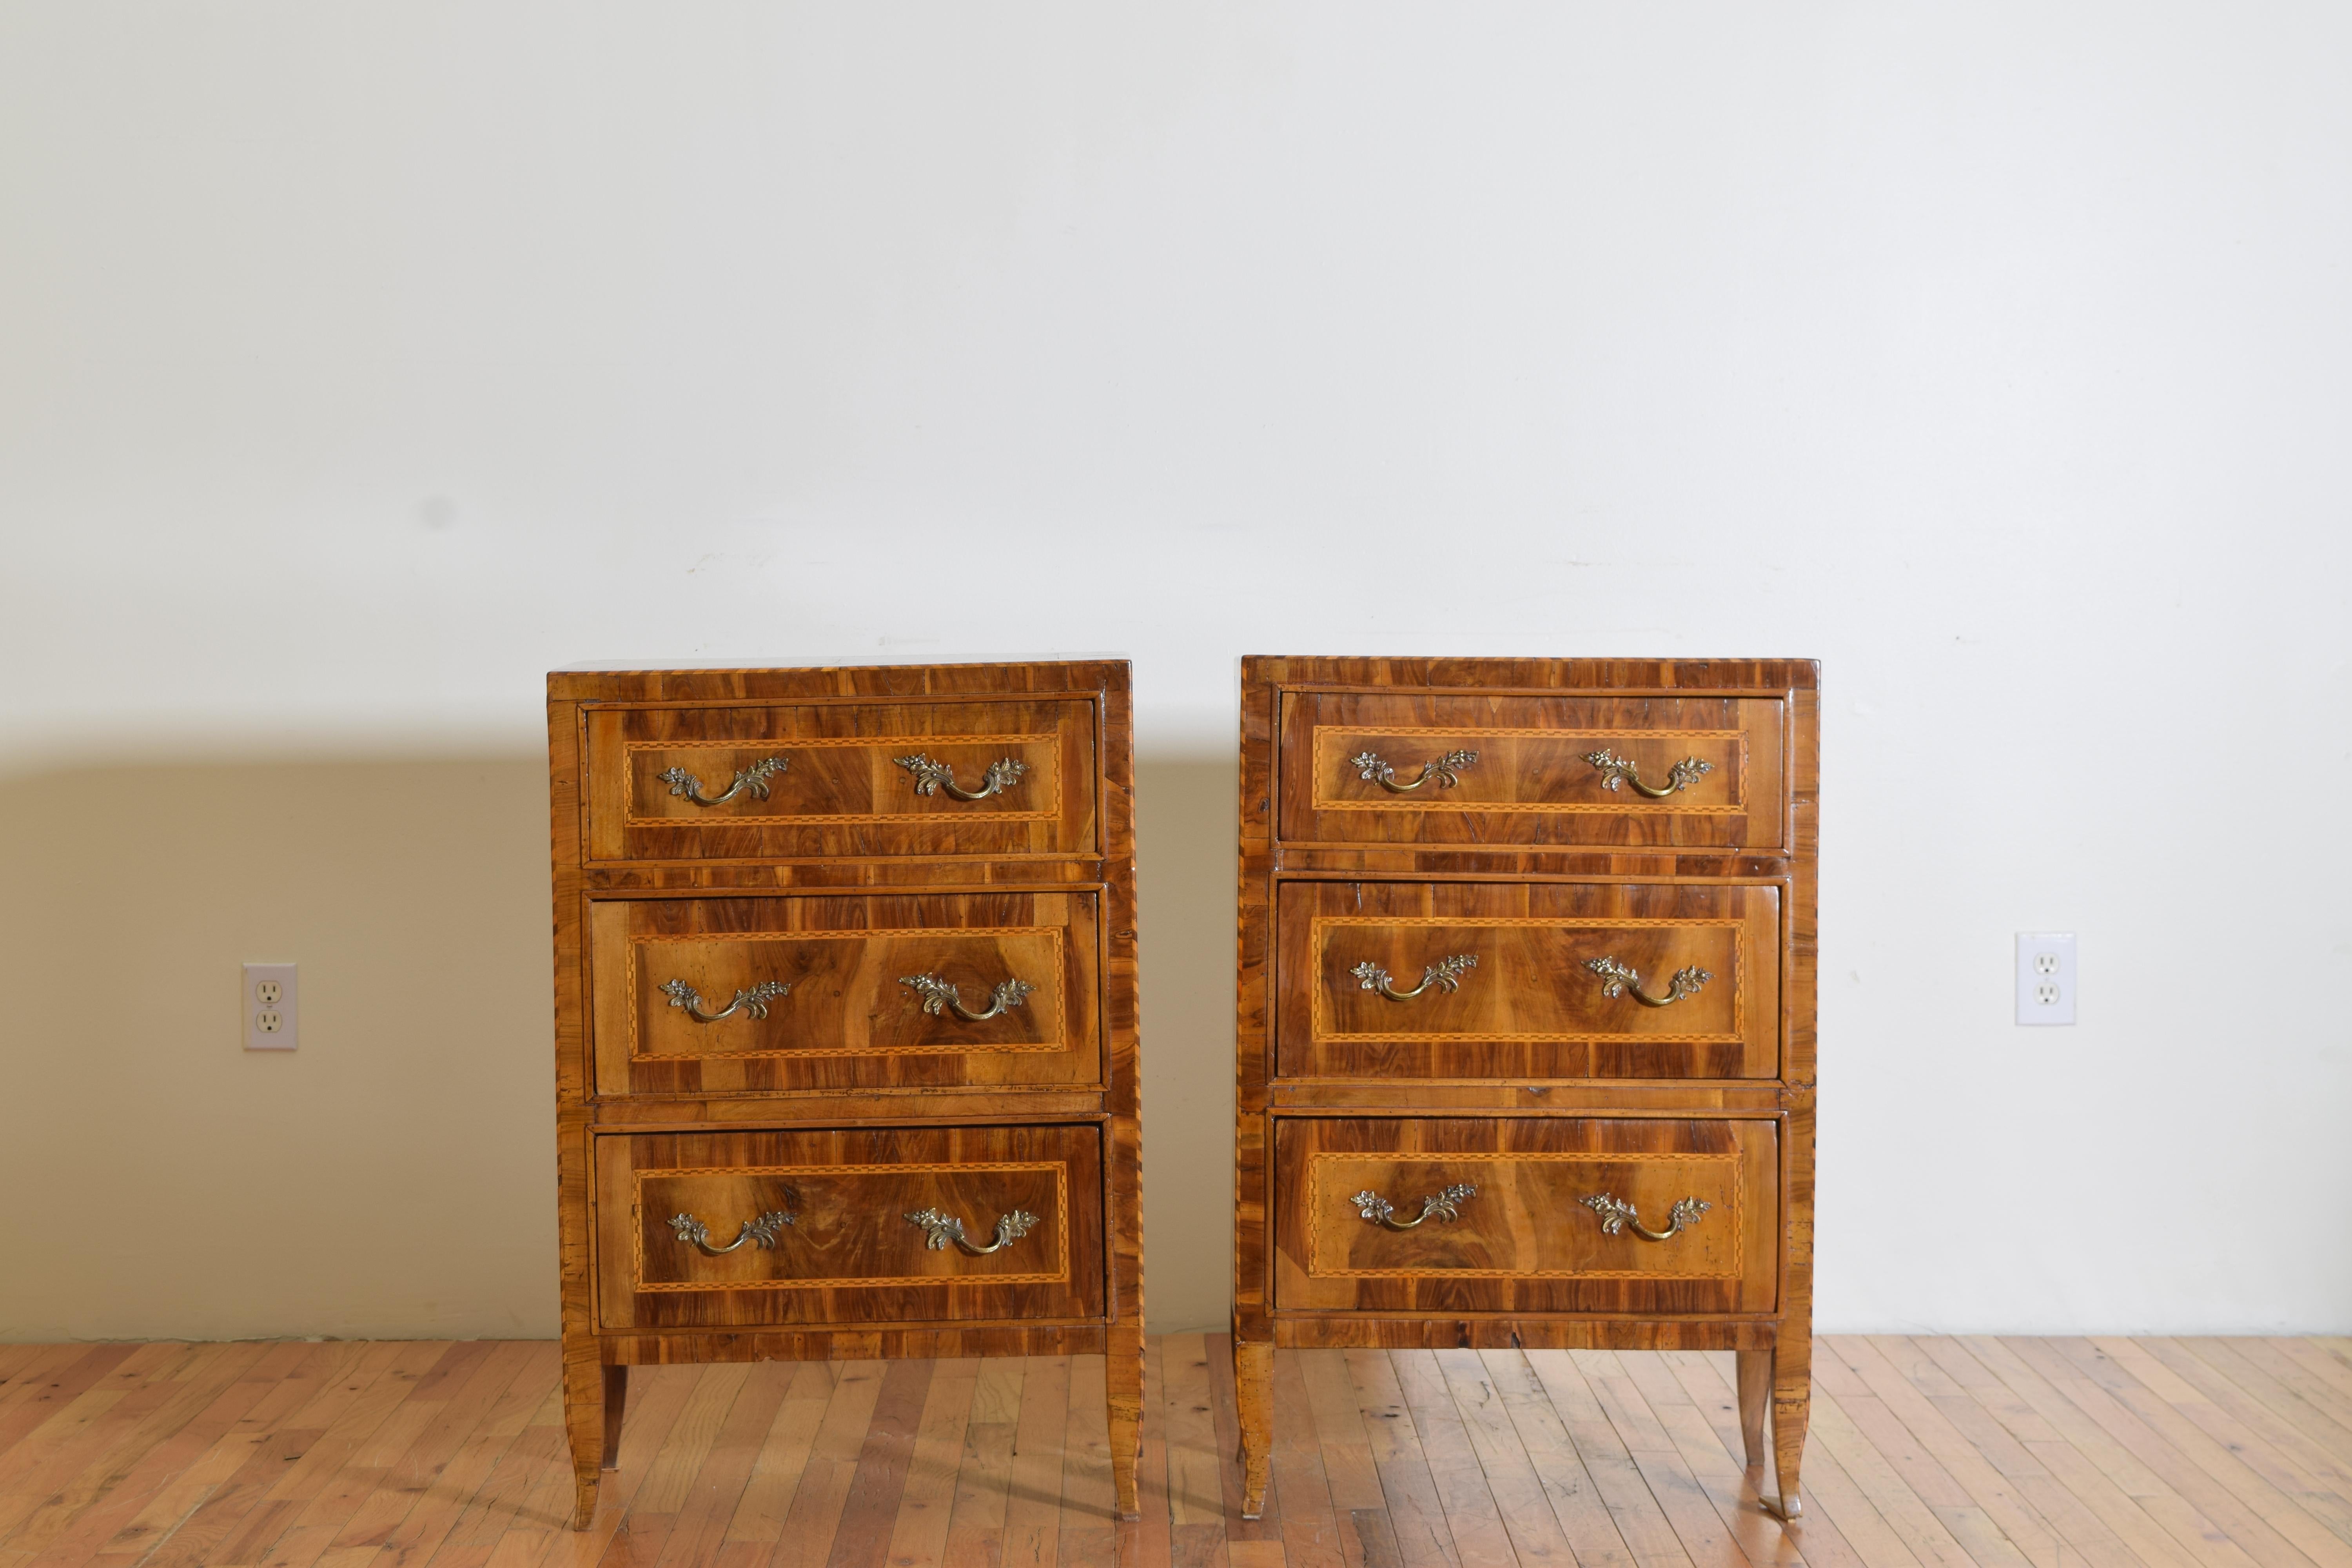 Louis XVI Italian LXVI Walnut Inlaid and Veneered 3 Drawer Bedside Commodes, Late 18th C.